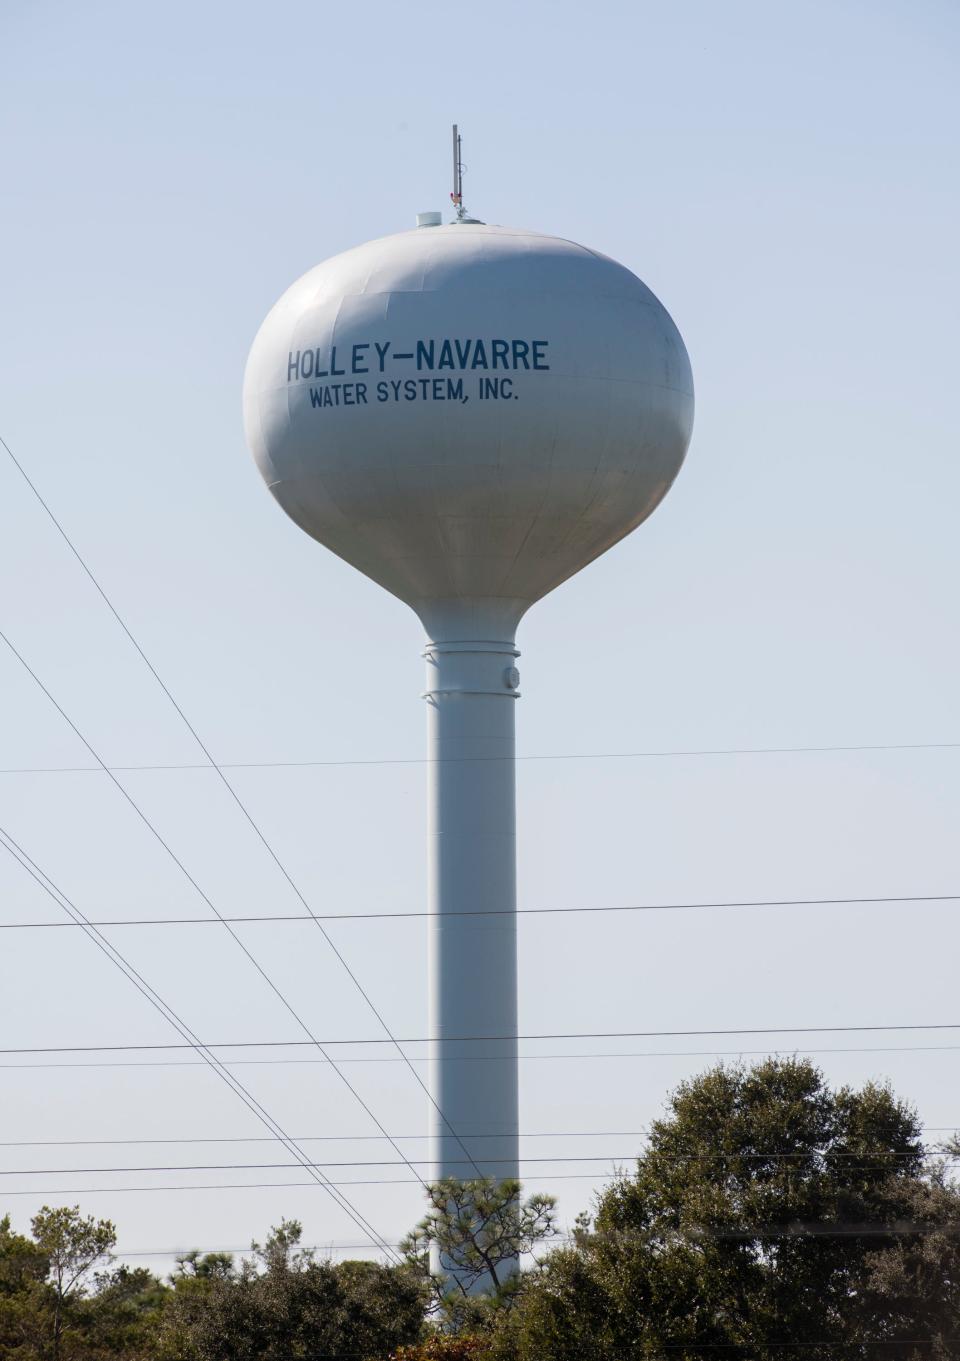 A Holley-Navarre Water System tower in Santa Rosa County on Monday, Nov. 8, 2021.